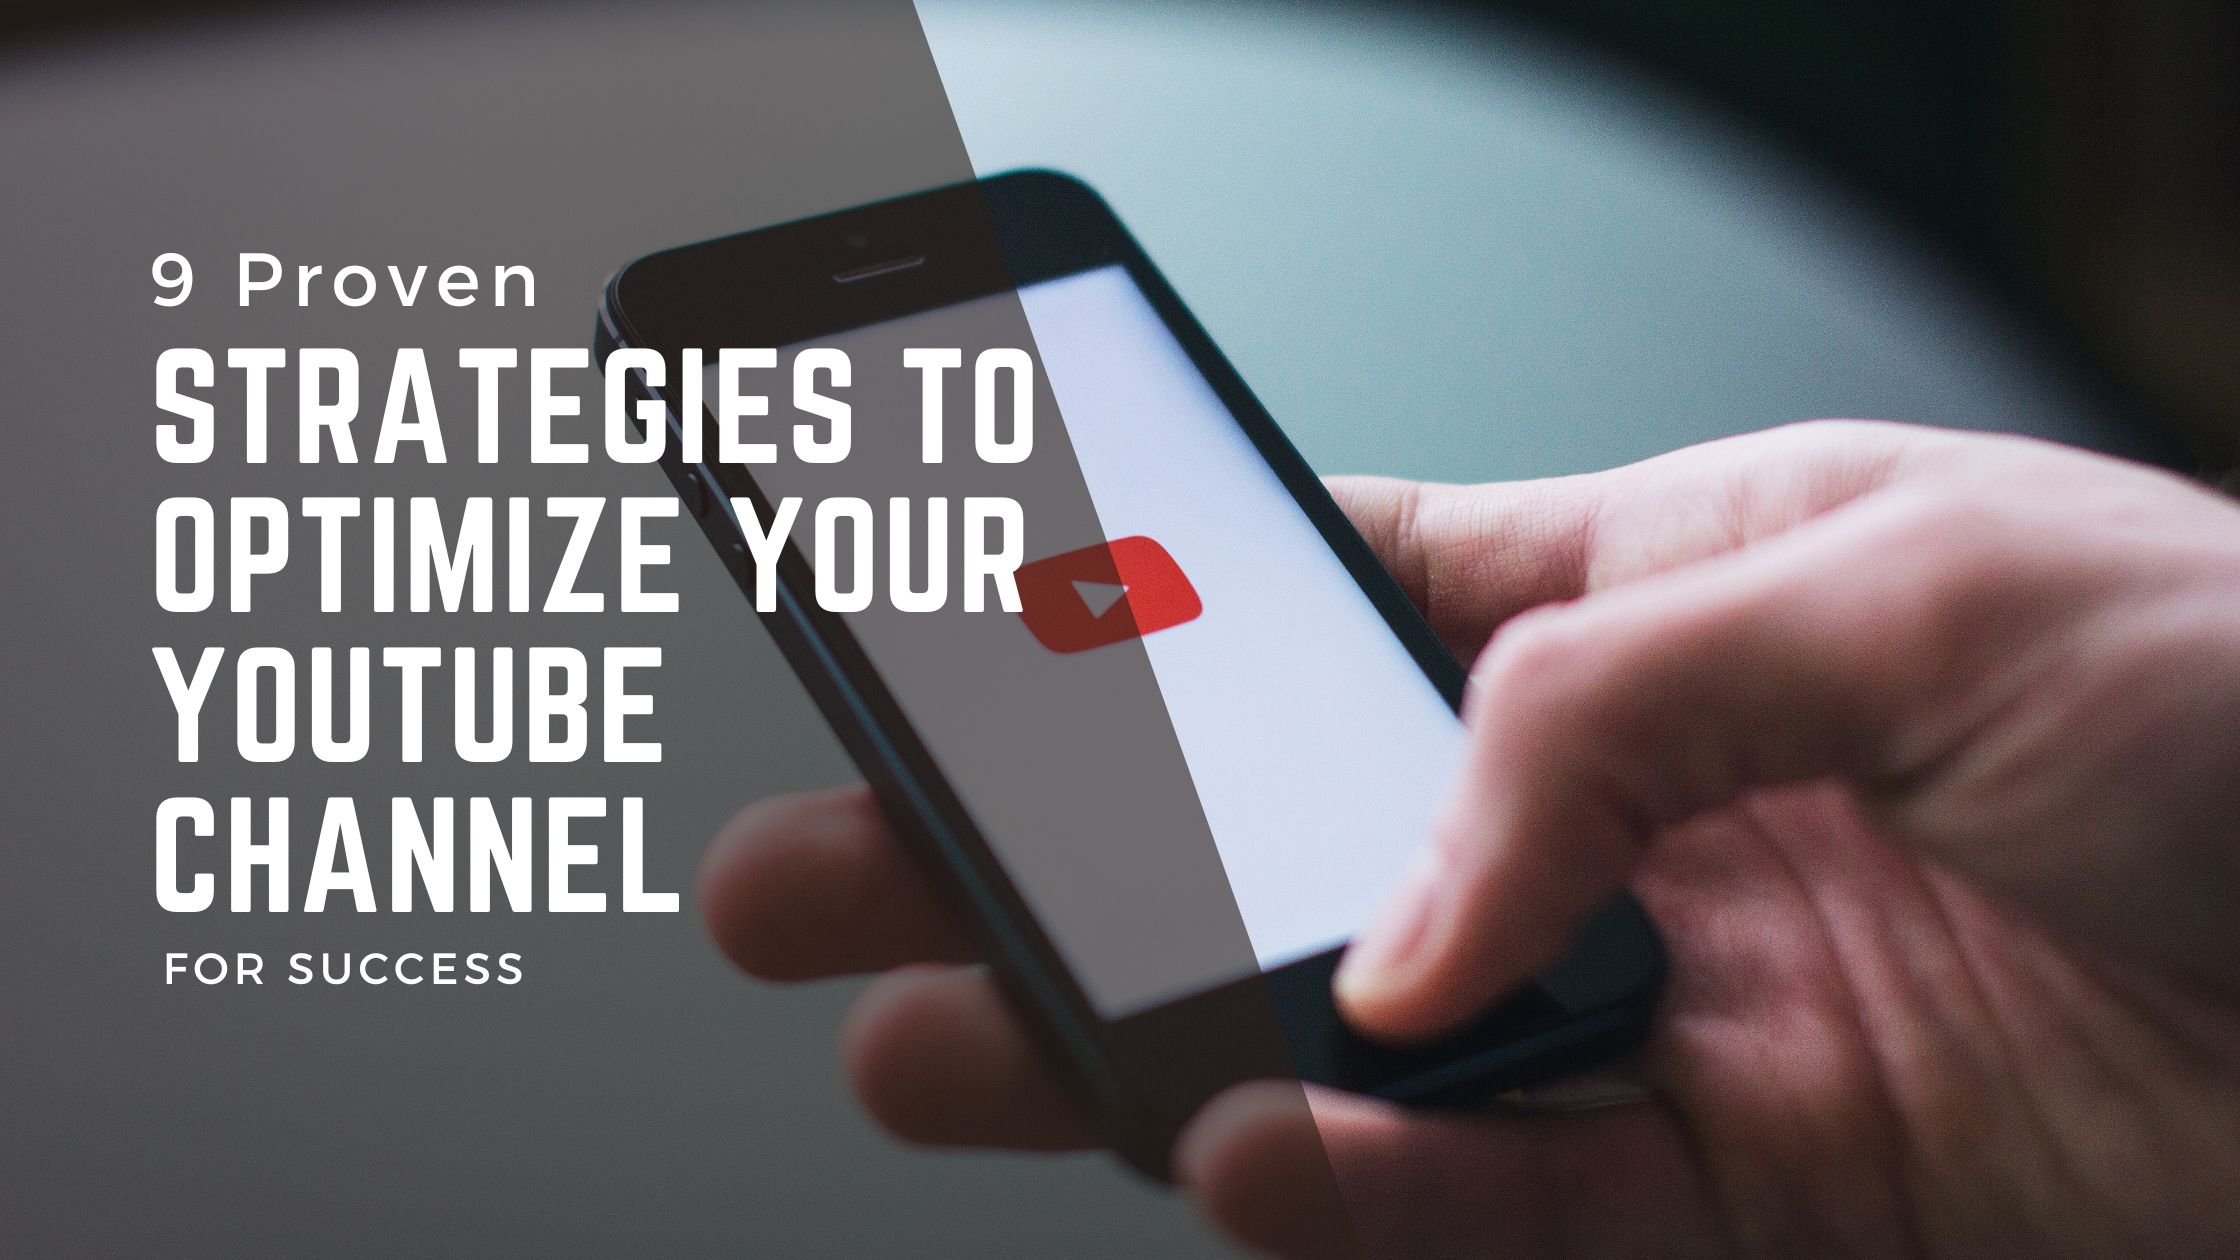 9 Proven Strategies to Optimize Your YouTube Channel for Success